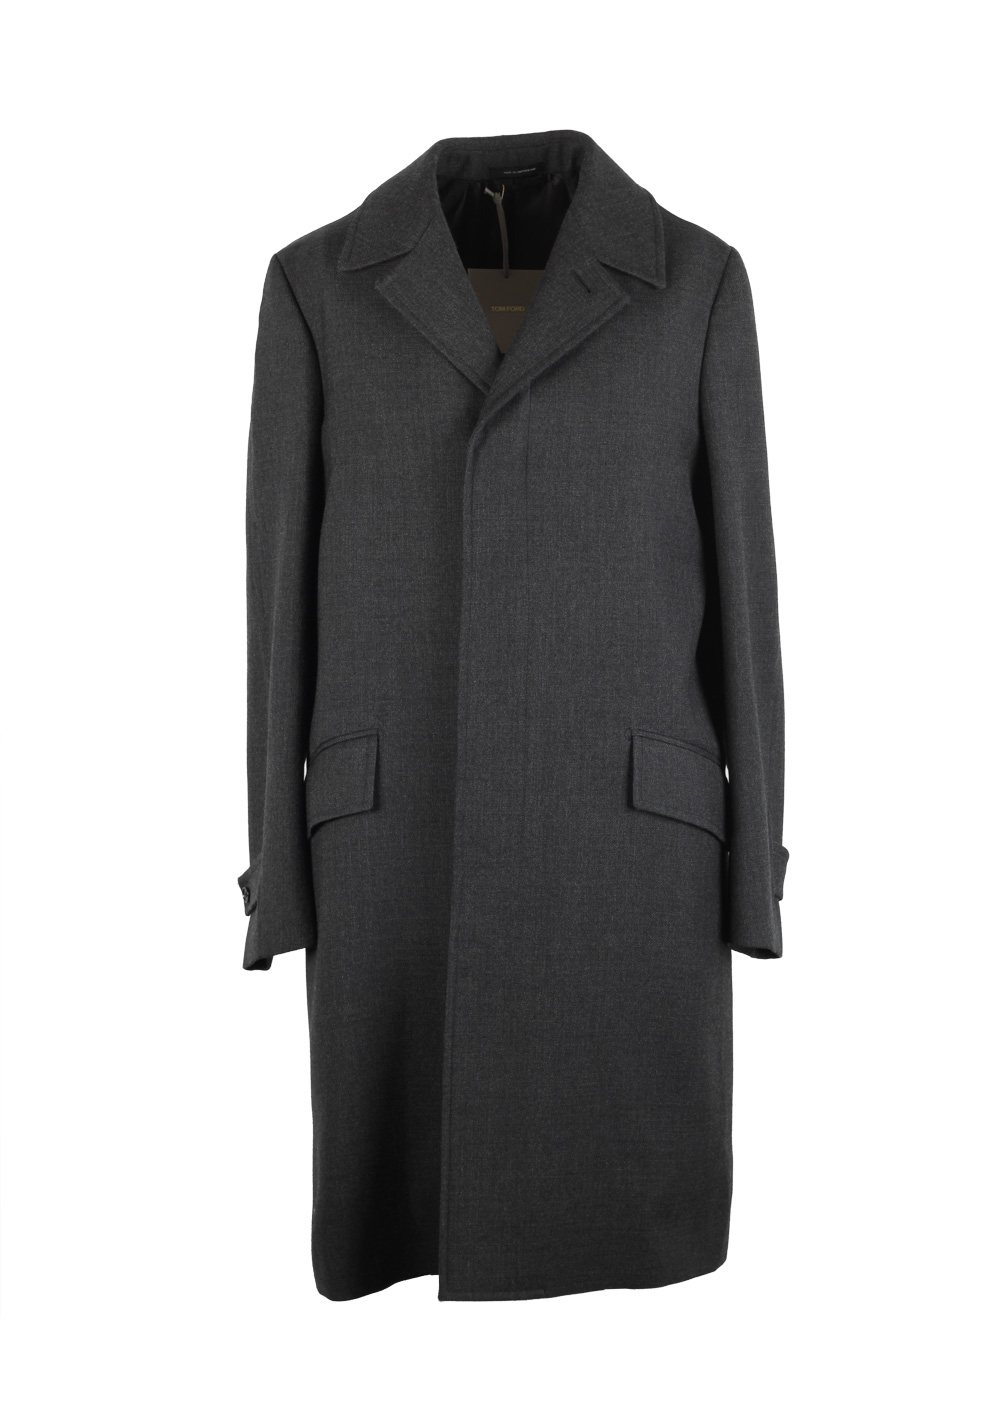 TOM FORD Gray Over Coat Size 48 / 38R U.S. Outerwear | Costume Limité